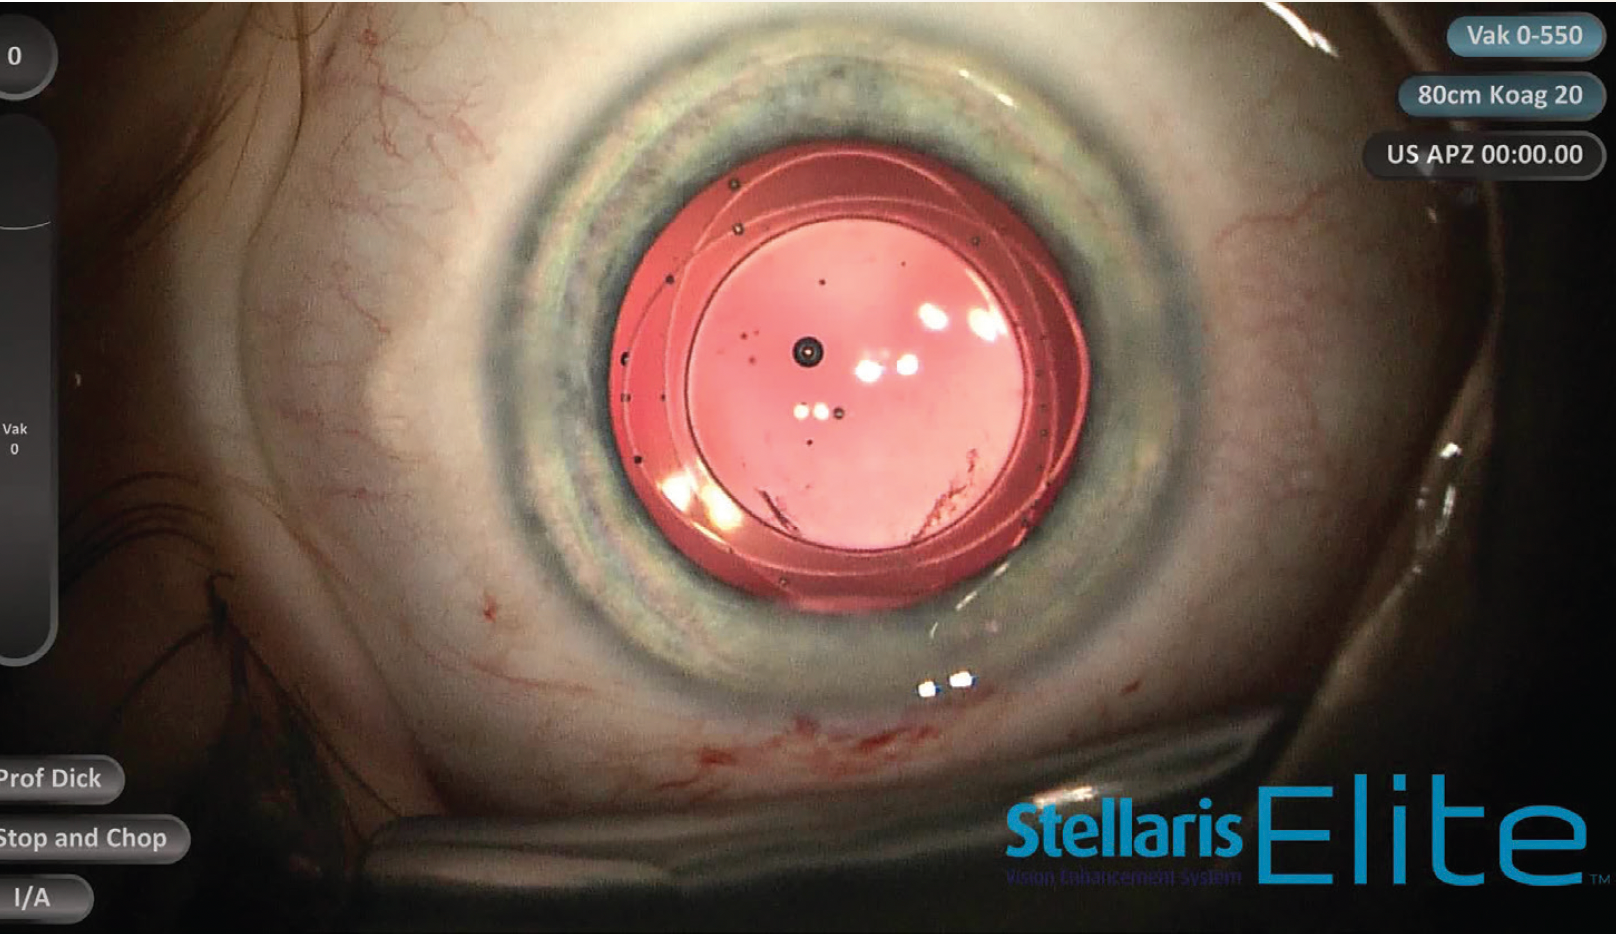 Preventing posterior capsule opacification in paediatric cataract surgery